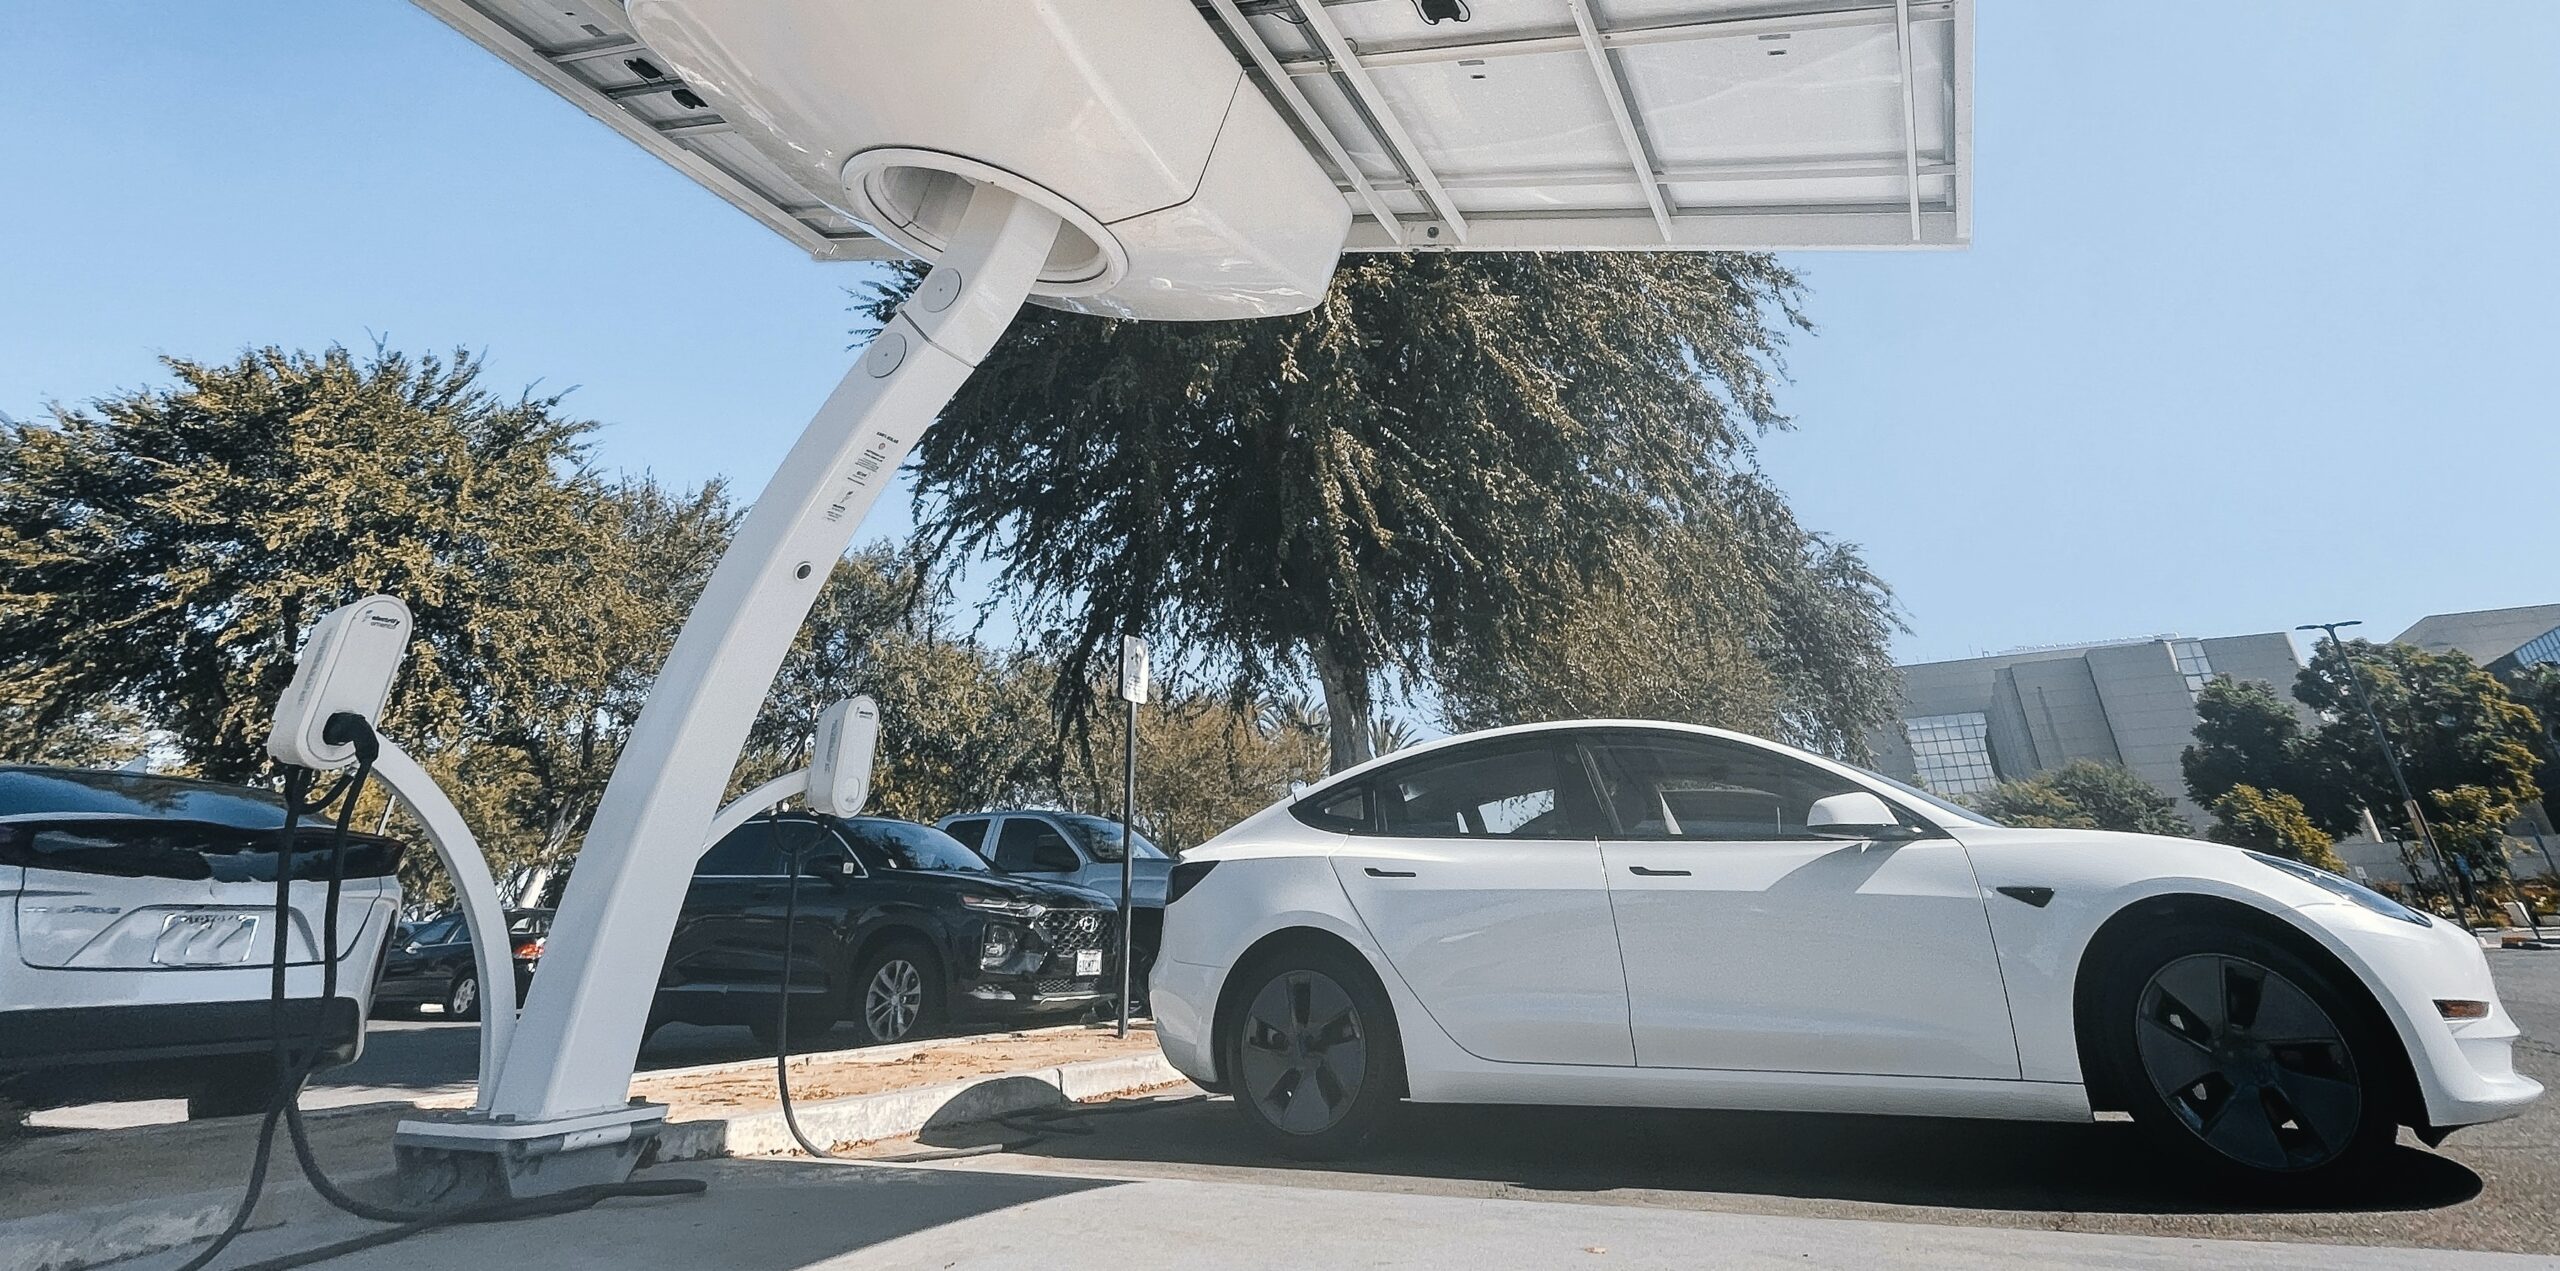 Two electronic vehicles plugged into a white solar powered EV charging station.